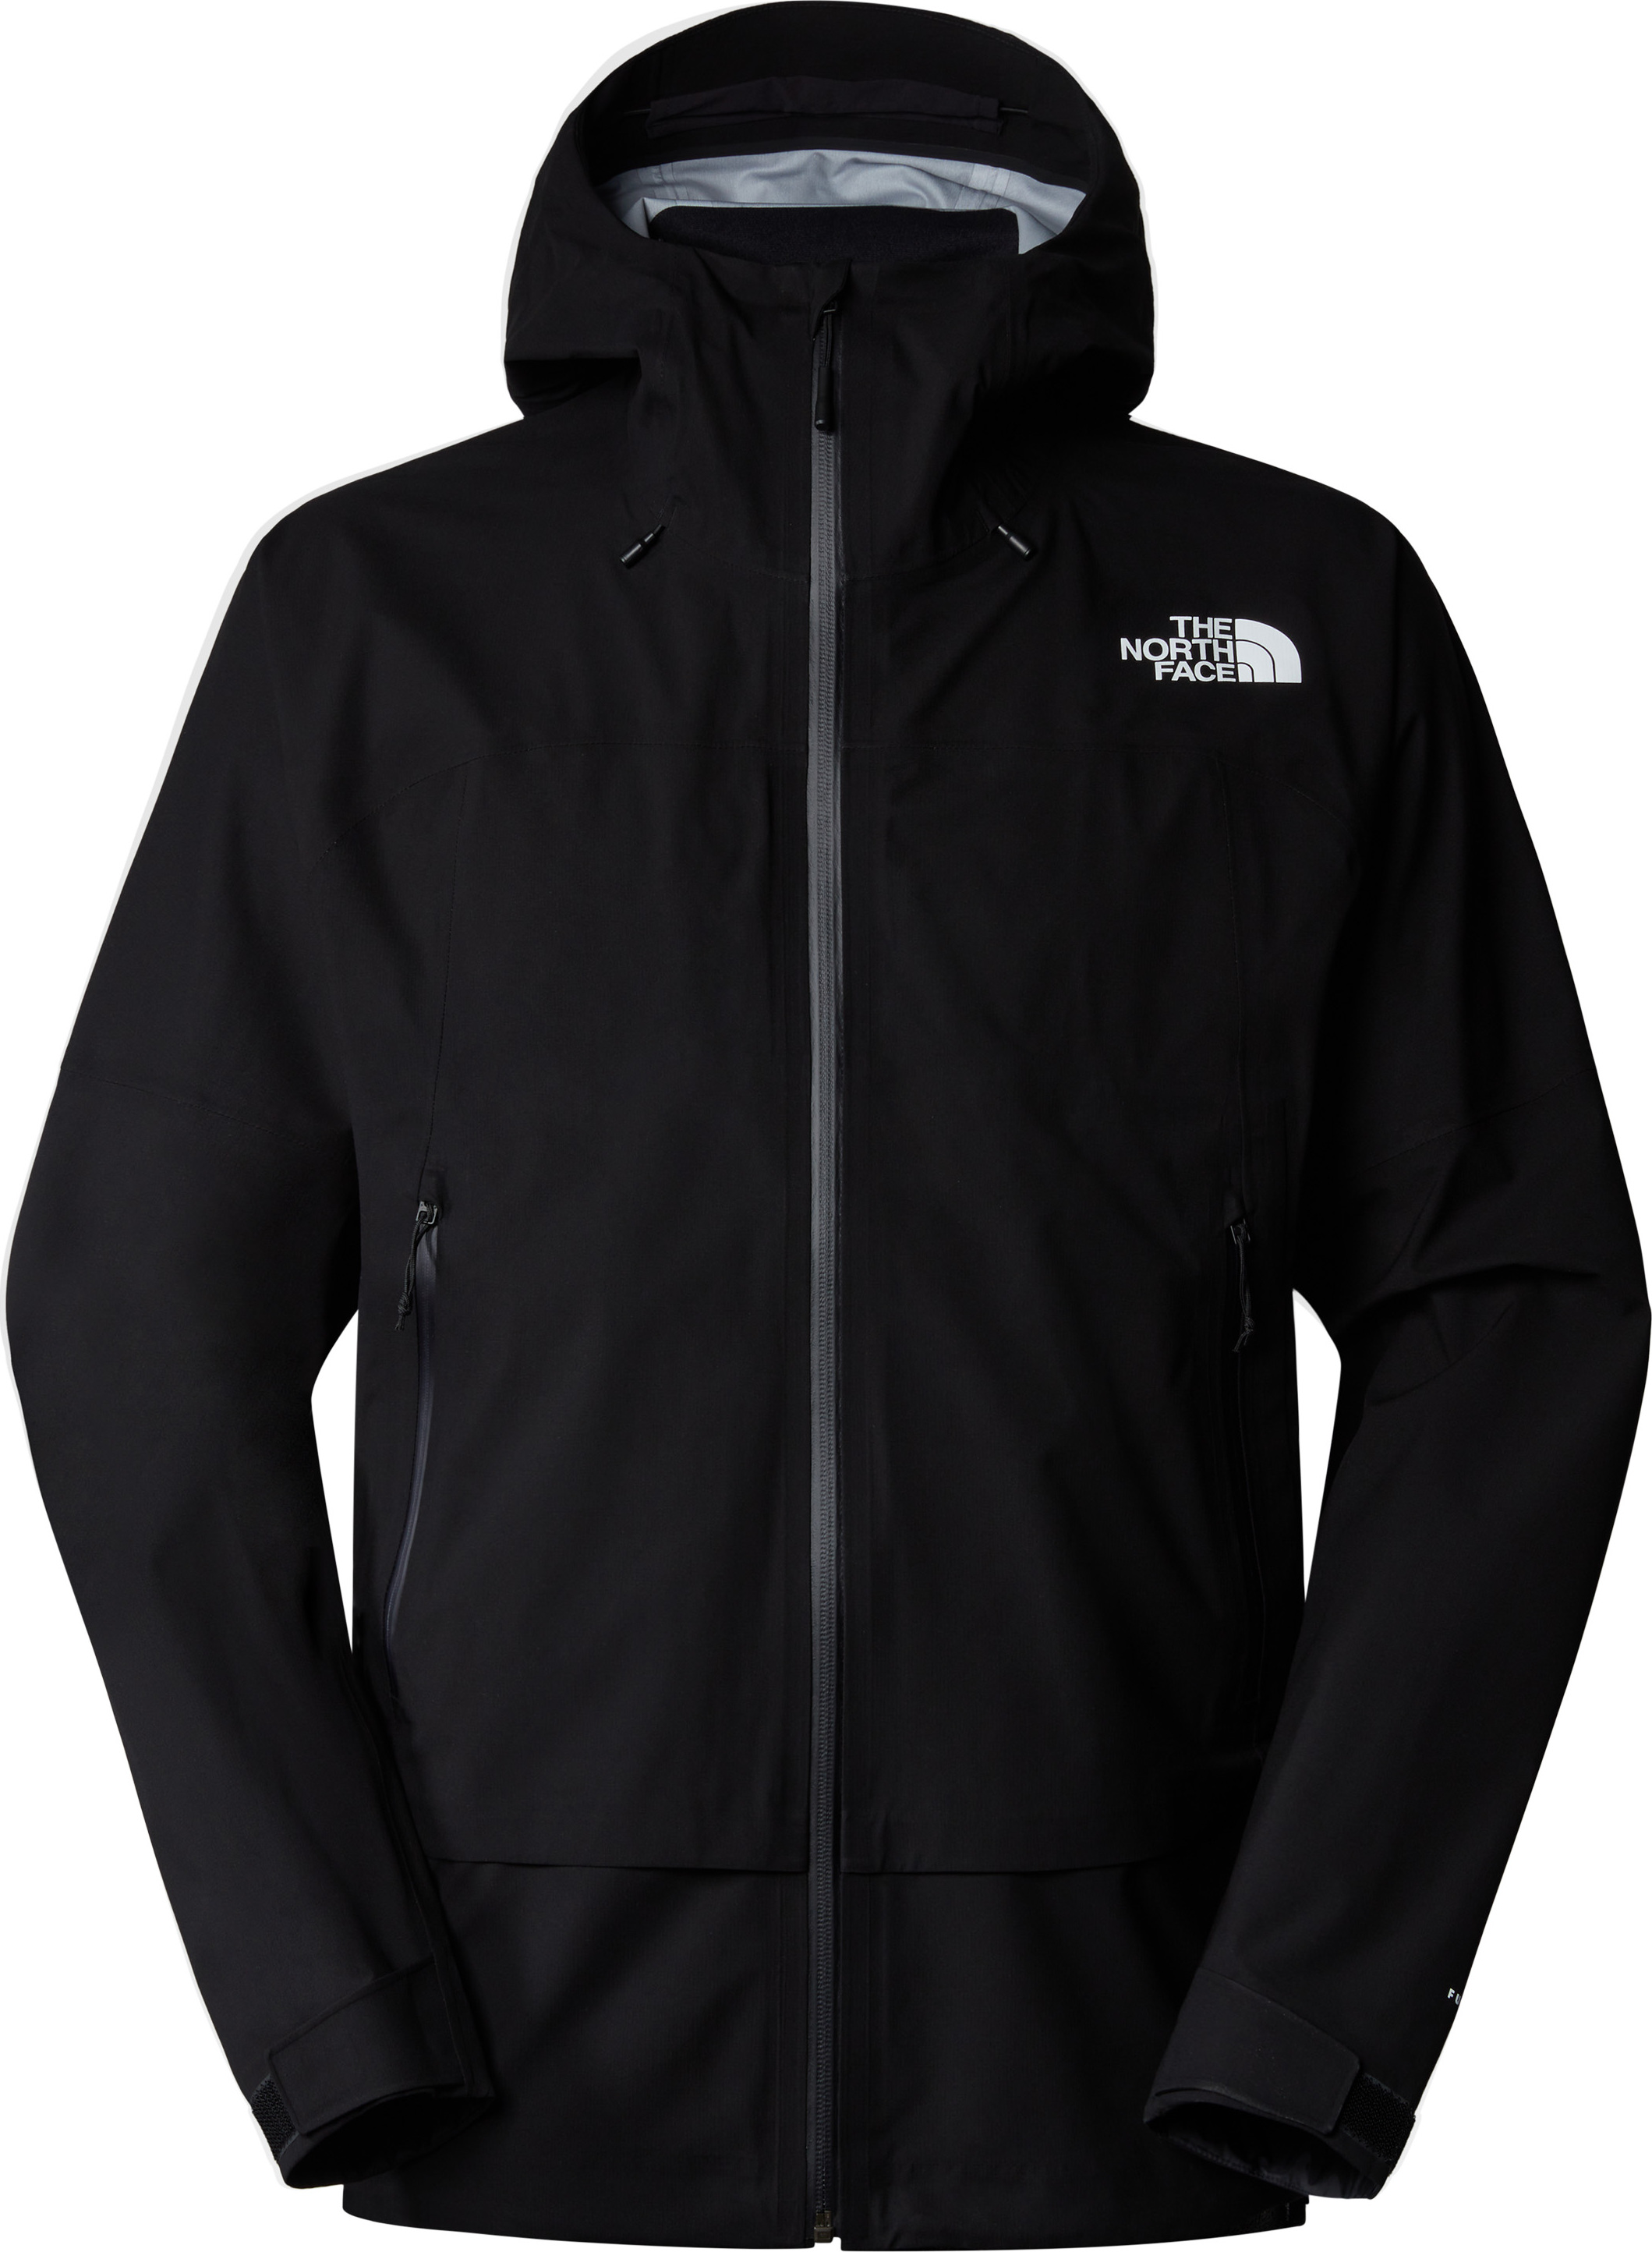 The North Face The North Face M Frontier Futurelight Jacket TNF Black M, Tnf Black